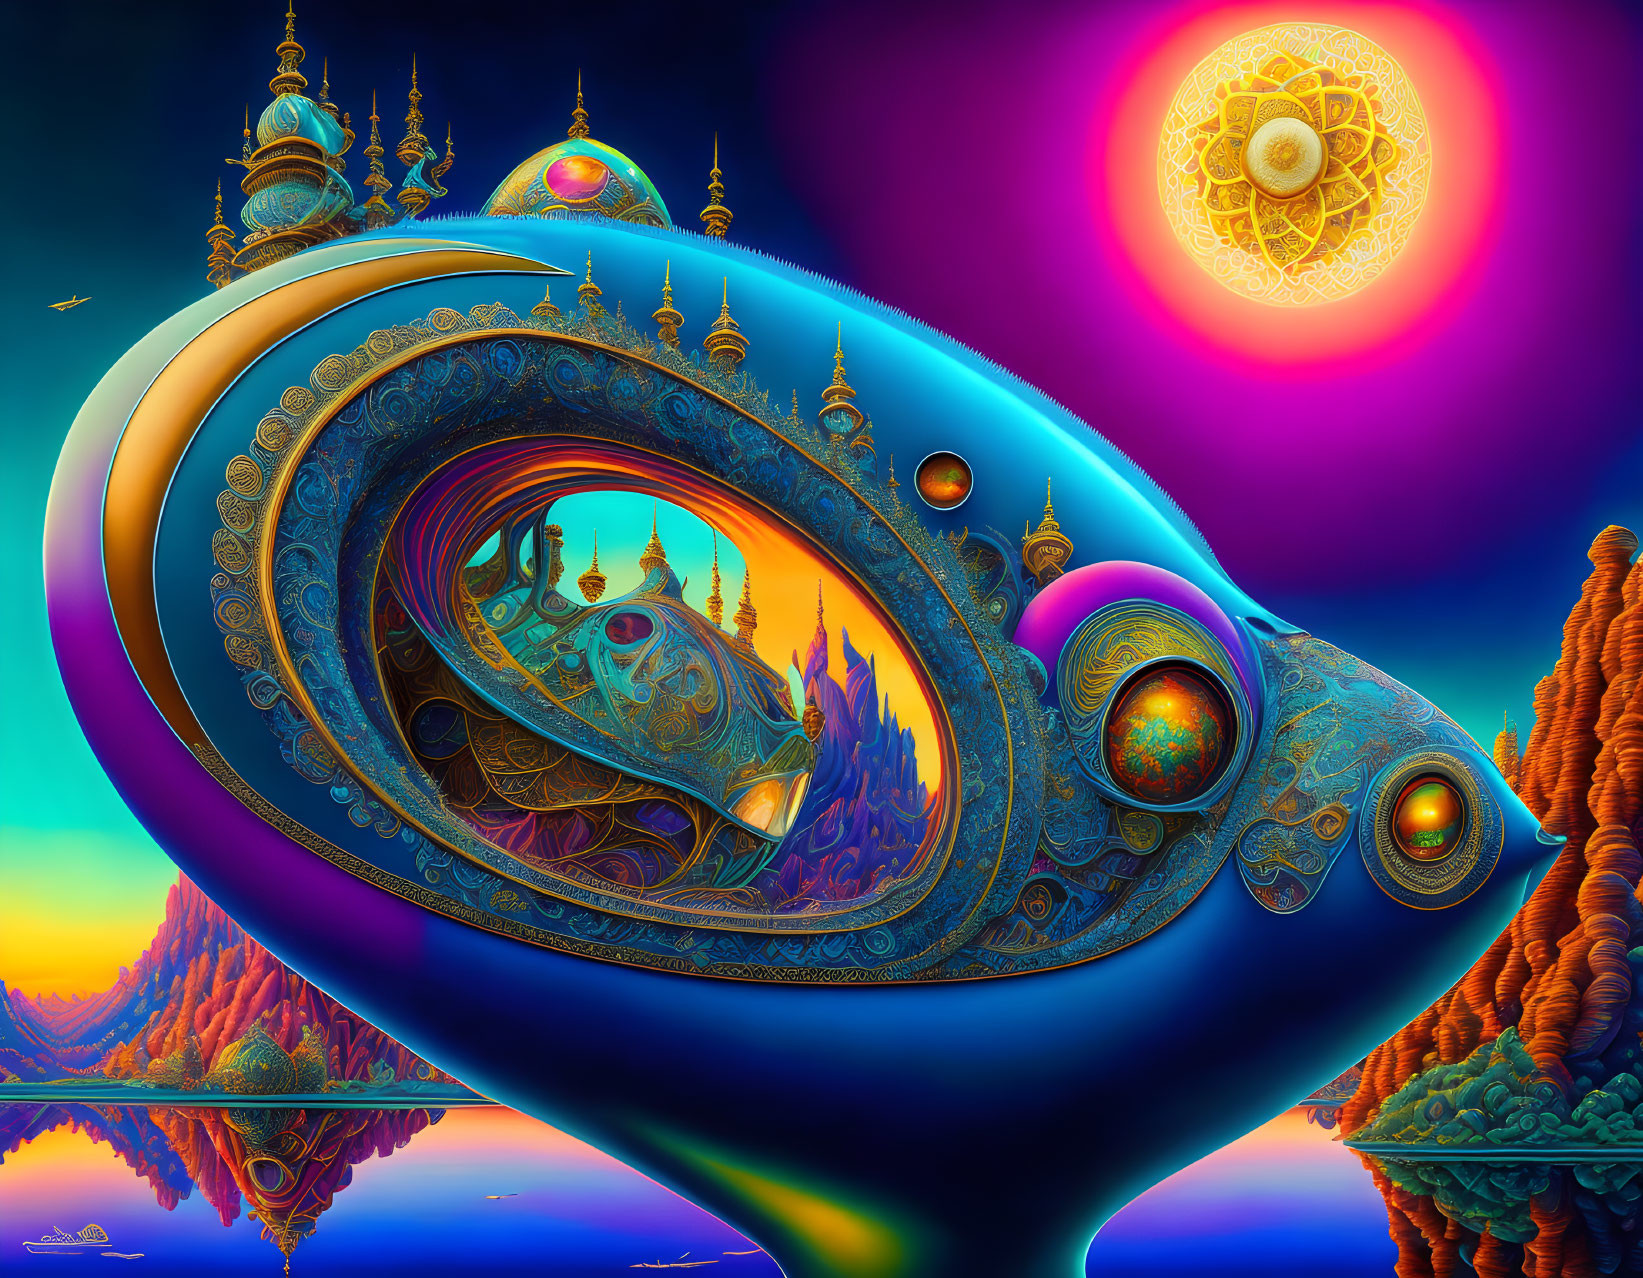 Surreal landscape with futuristic oval structure under psychedelic sky